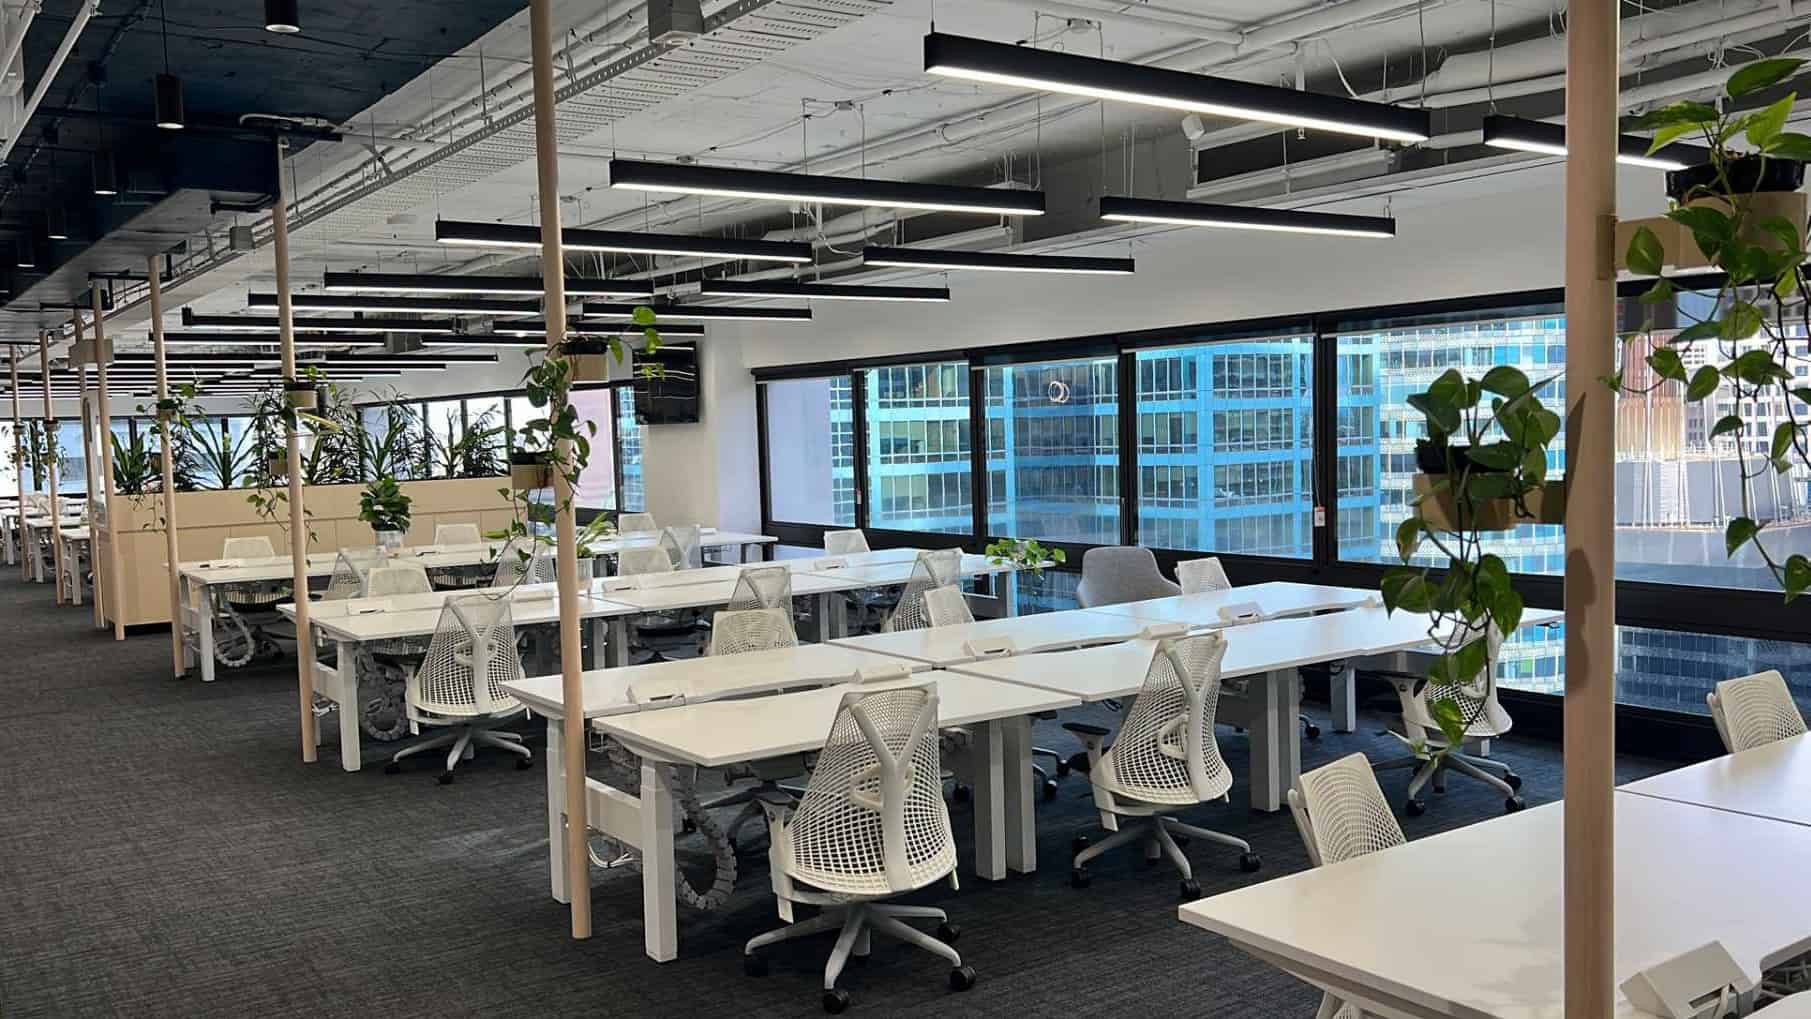 Rows of Herman Miller Sayl Chairs in a high rise office setting.